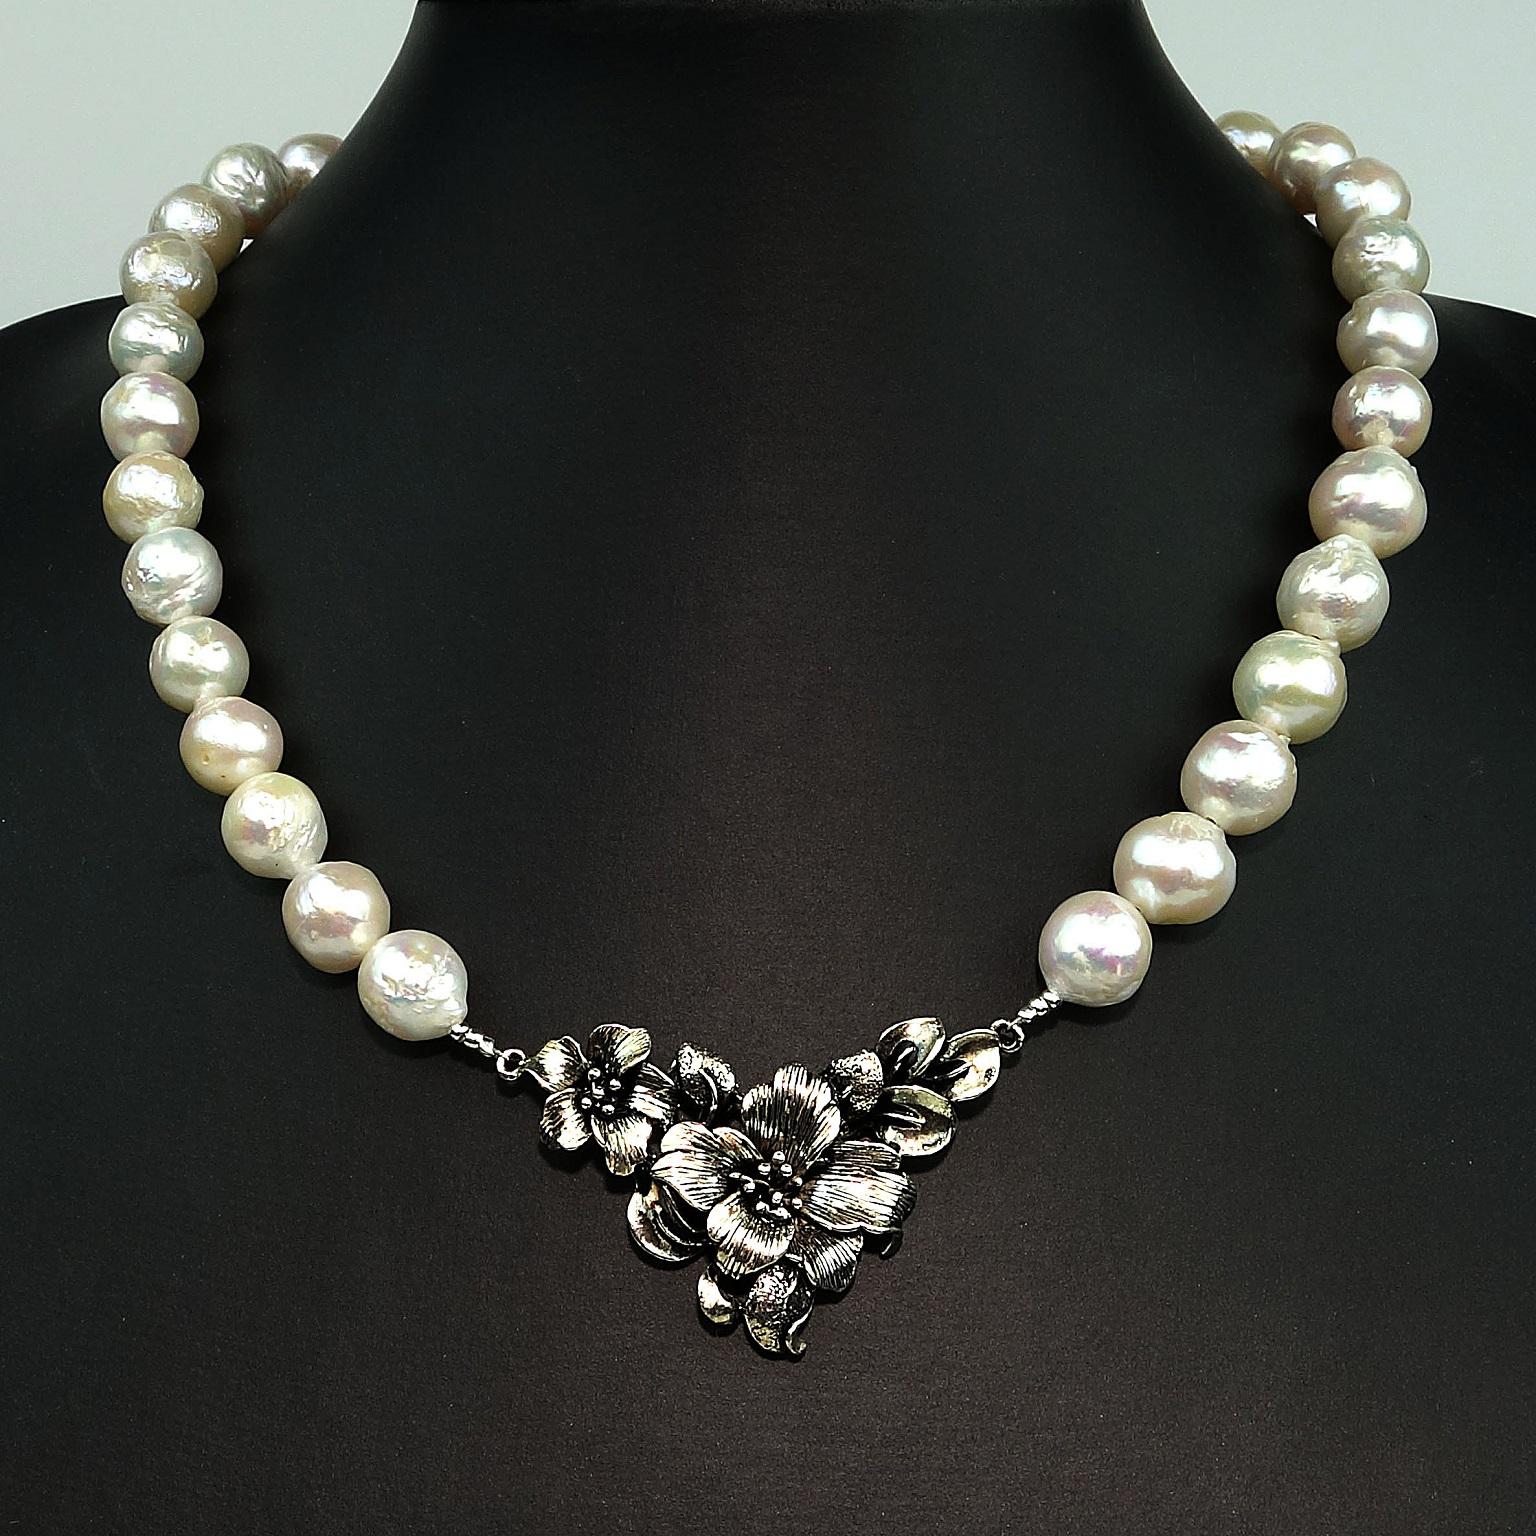 Bead AJD White Pearl Necklace with Floral Sterling Focal